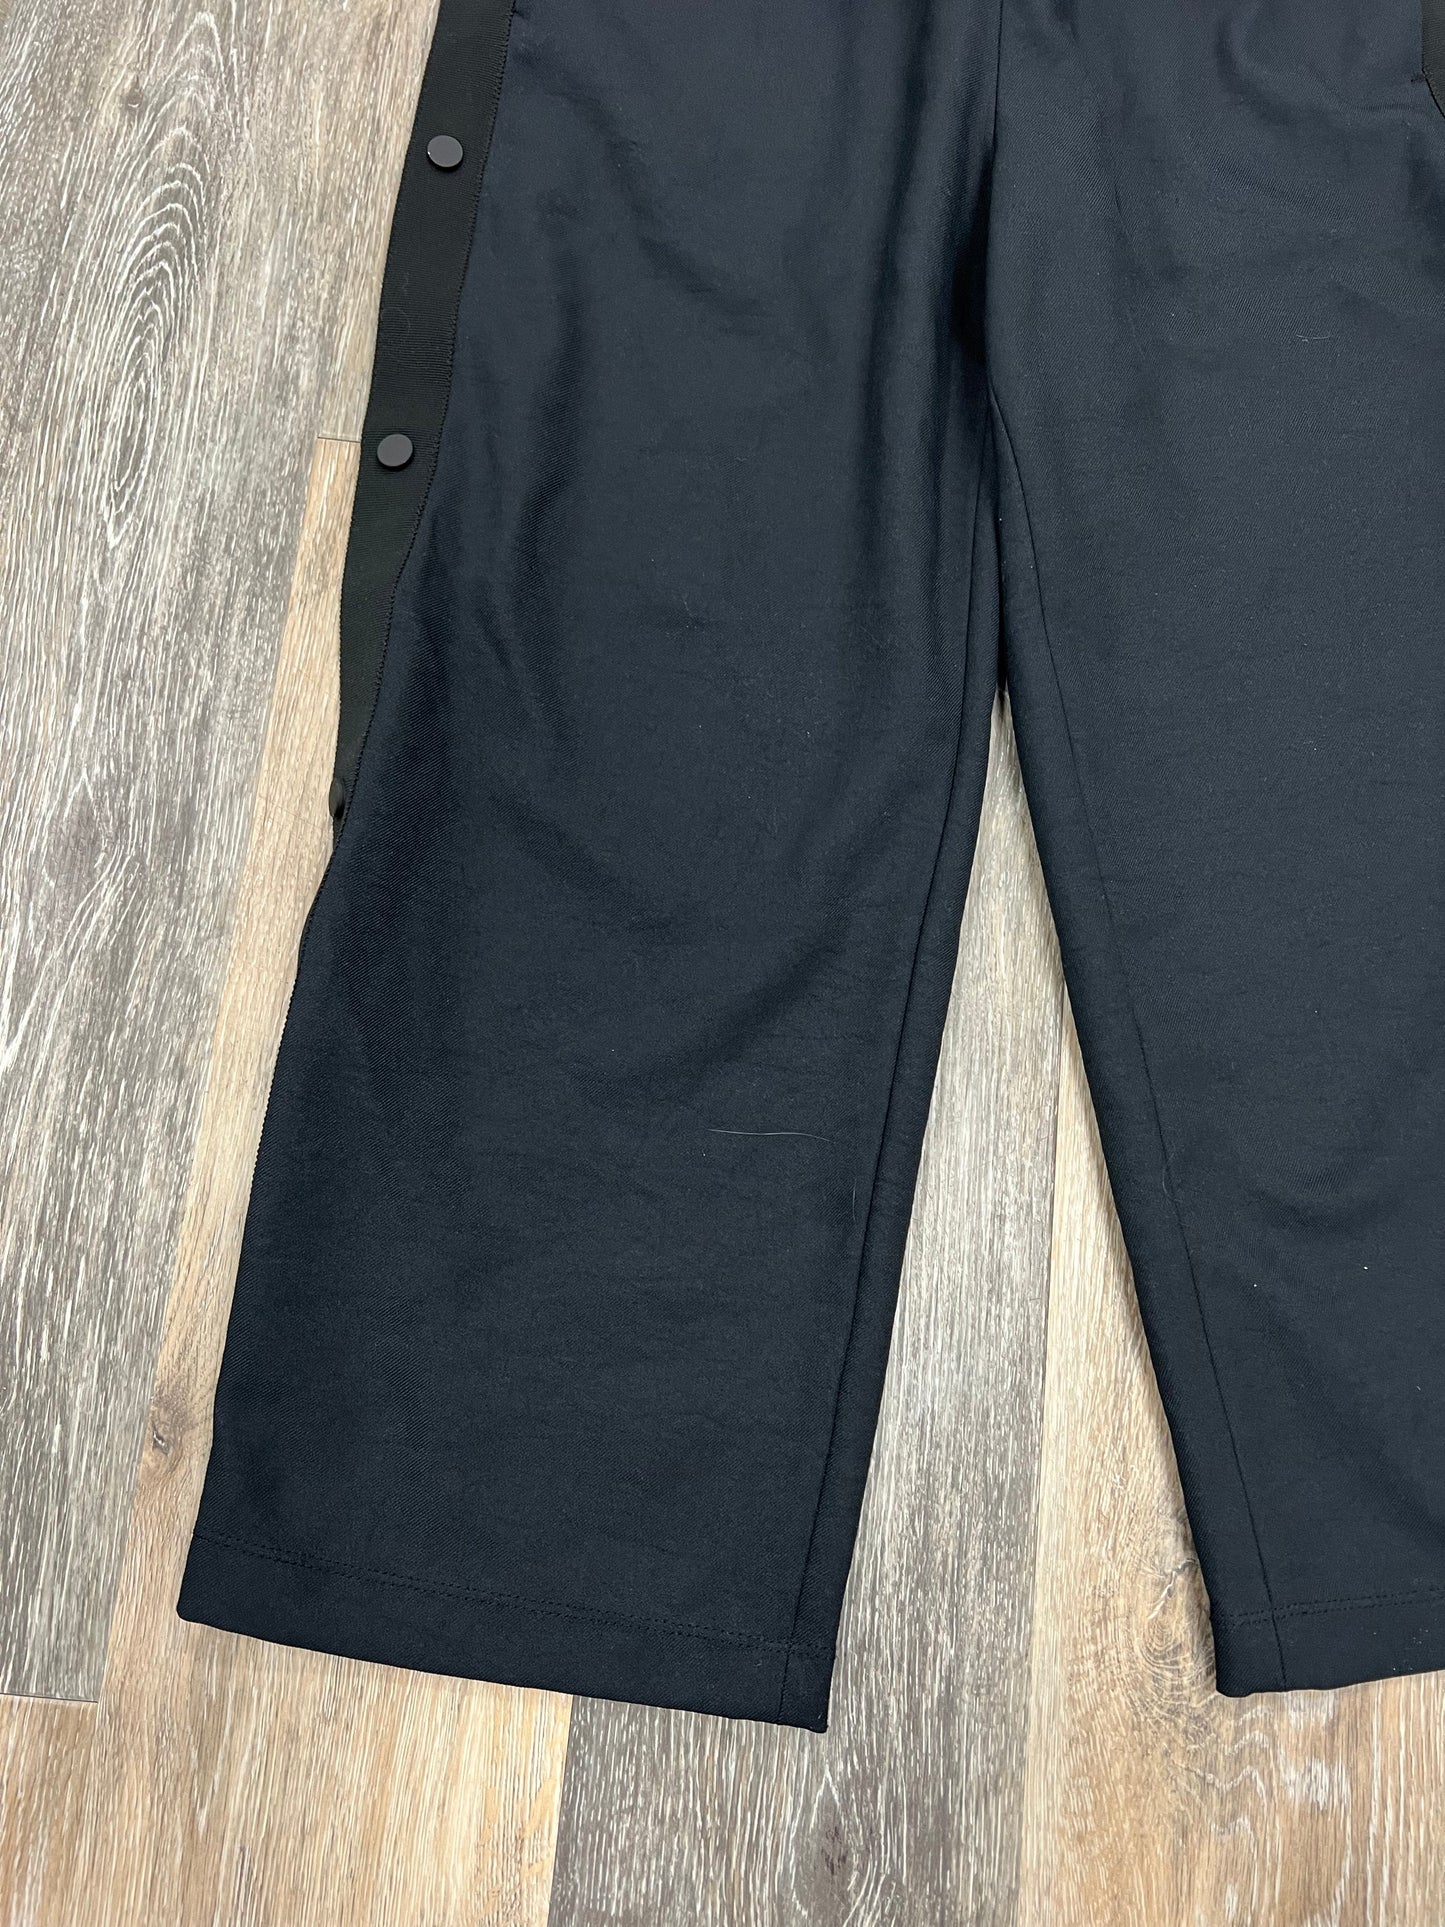 Pants Ankle By James Perse  Size: S